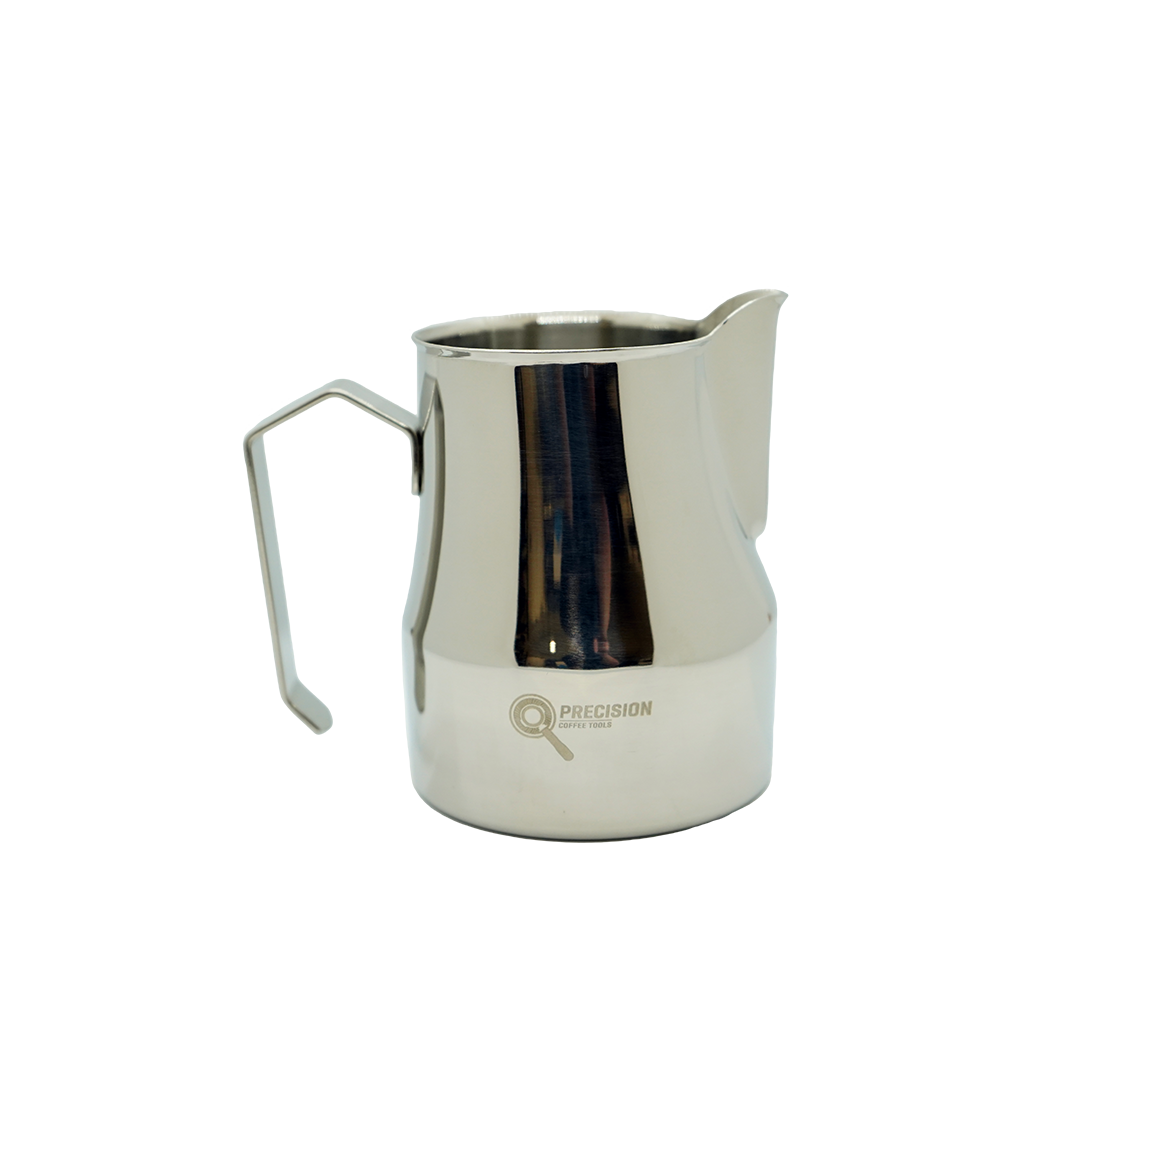 Precision / Professional Stainless Steel Milk Pitcher